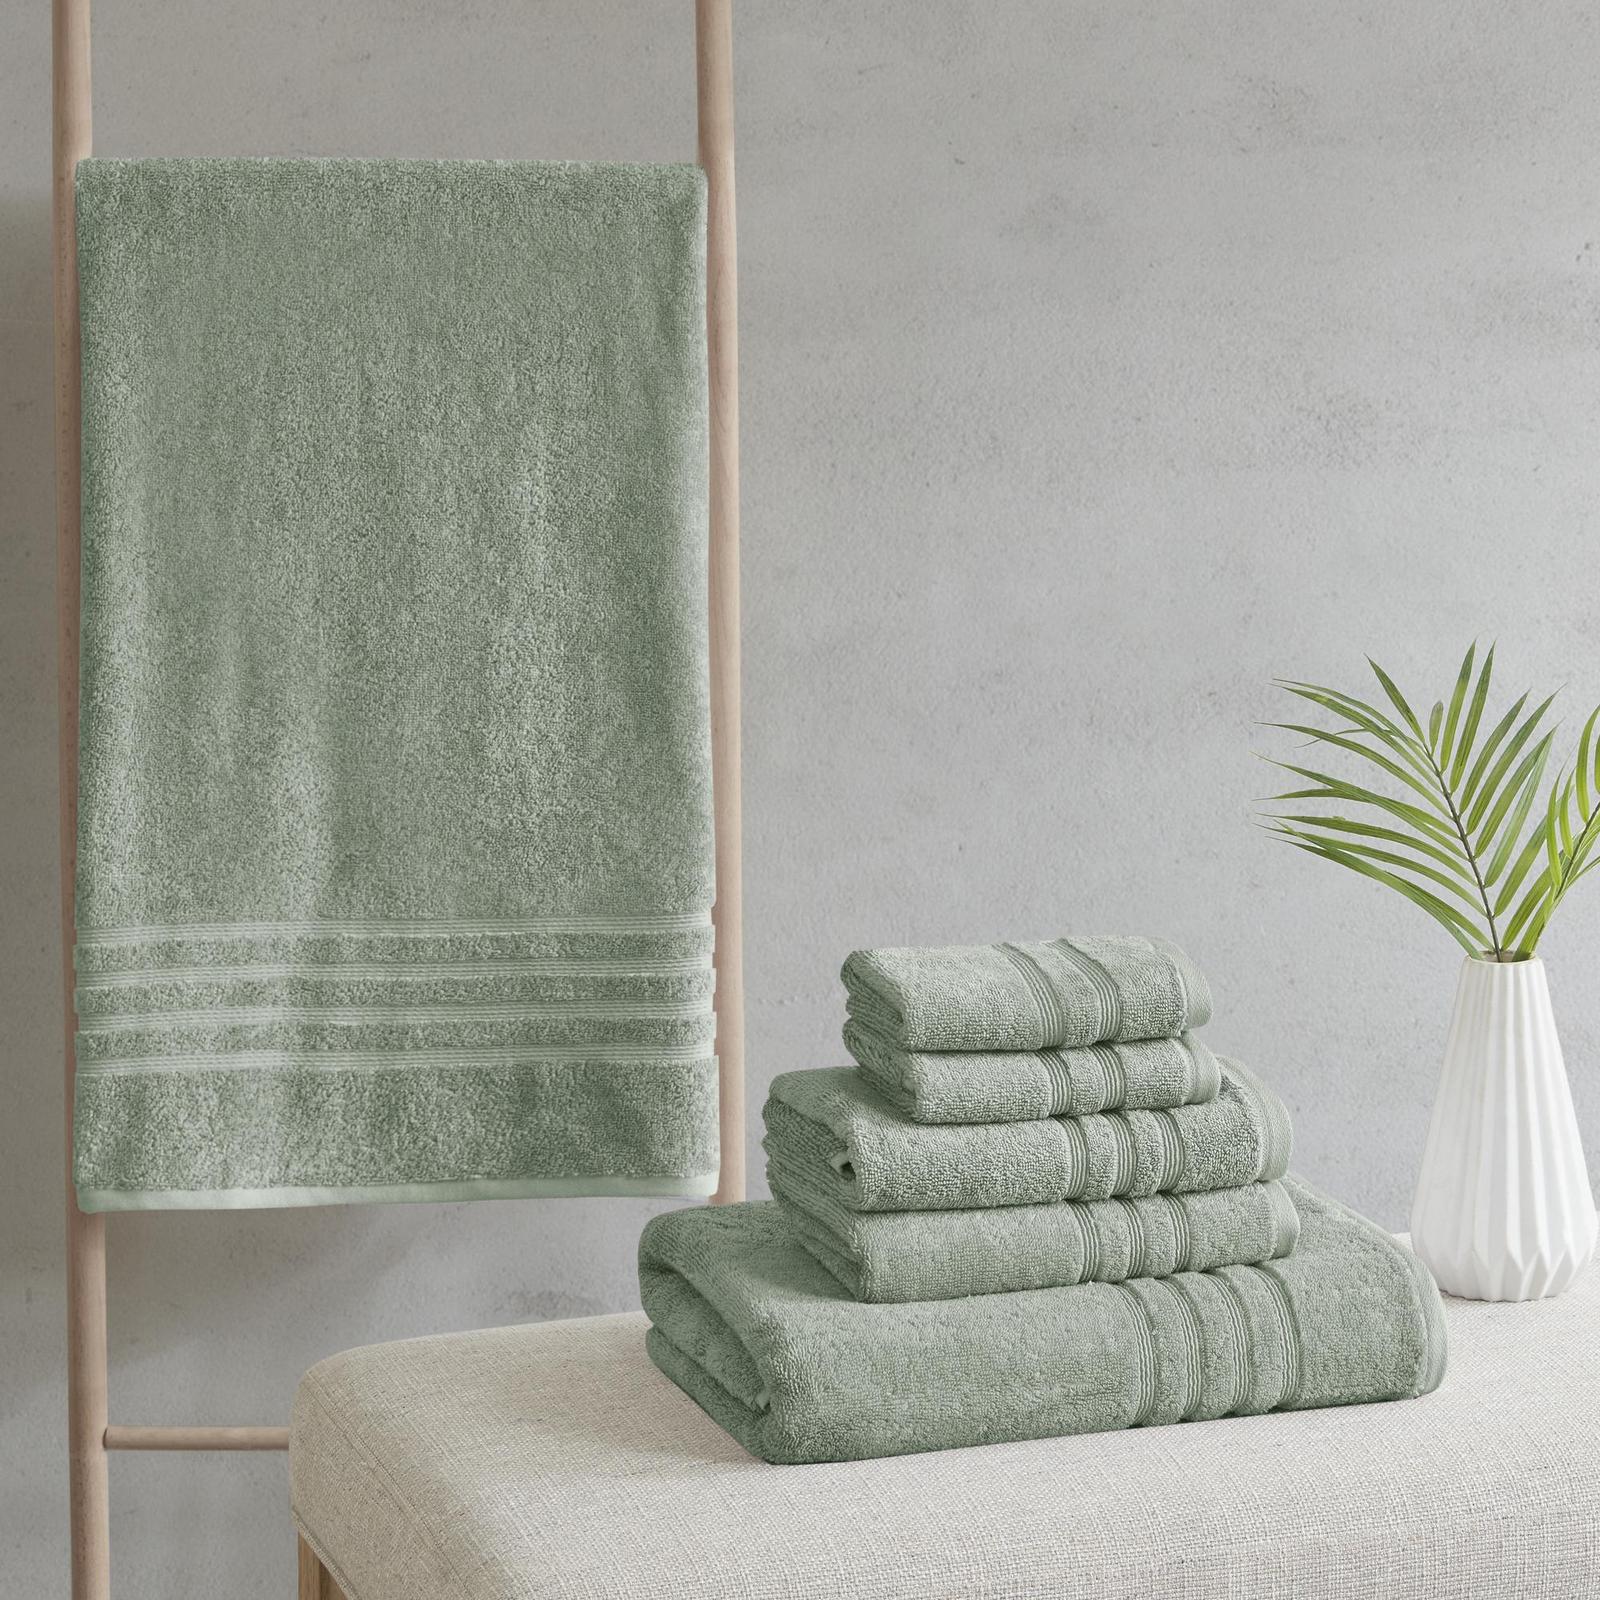 7 Best Organic Bath Towels To Elevate Your Bathtime Ritual - The